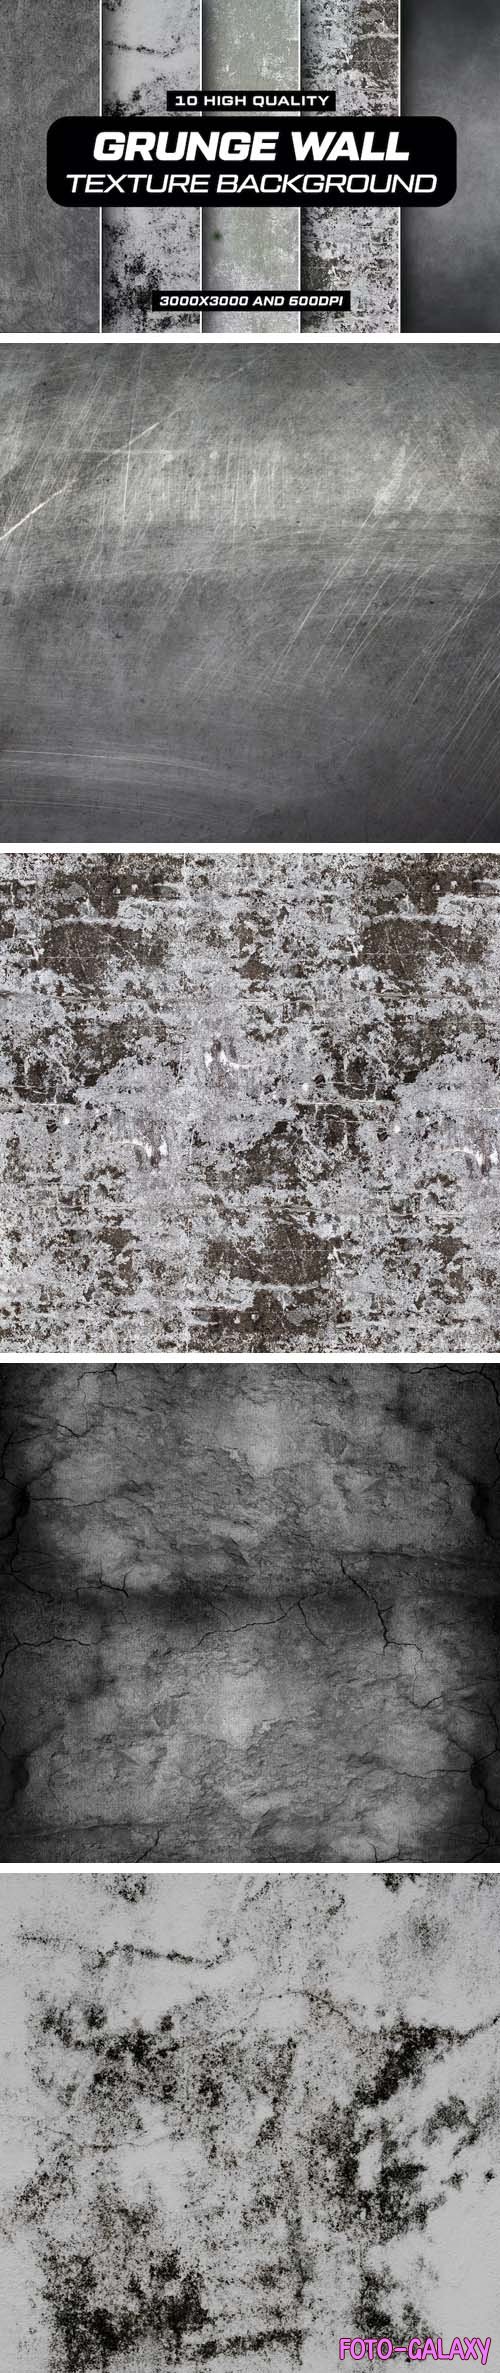 10 Grunge Wall Texture Backgrounds